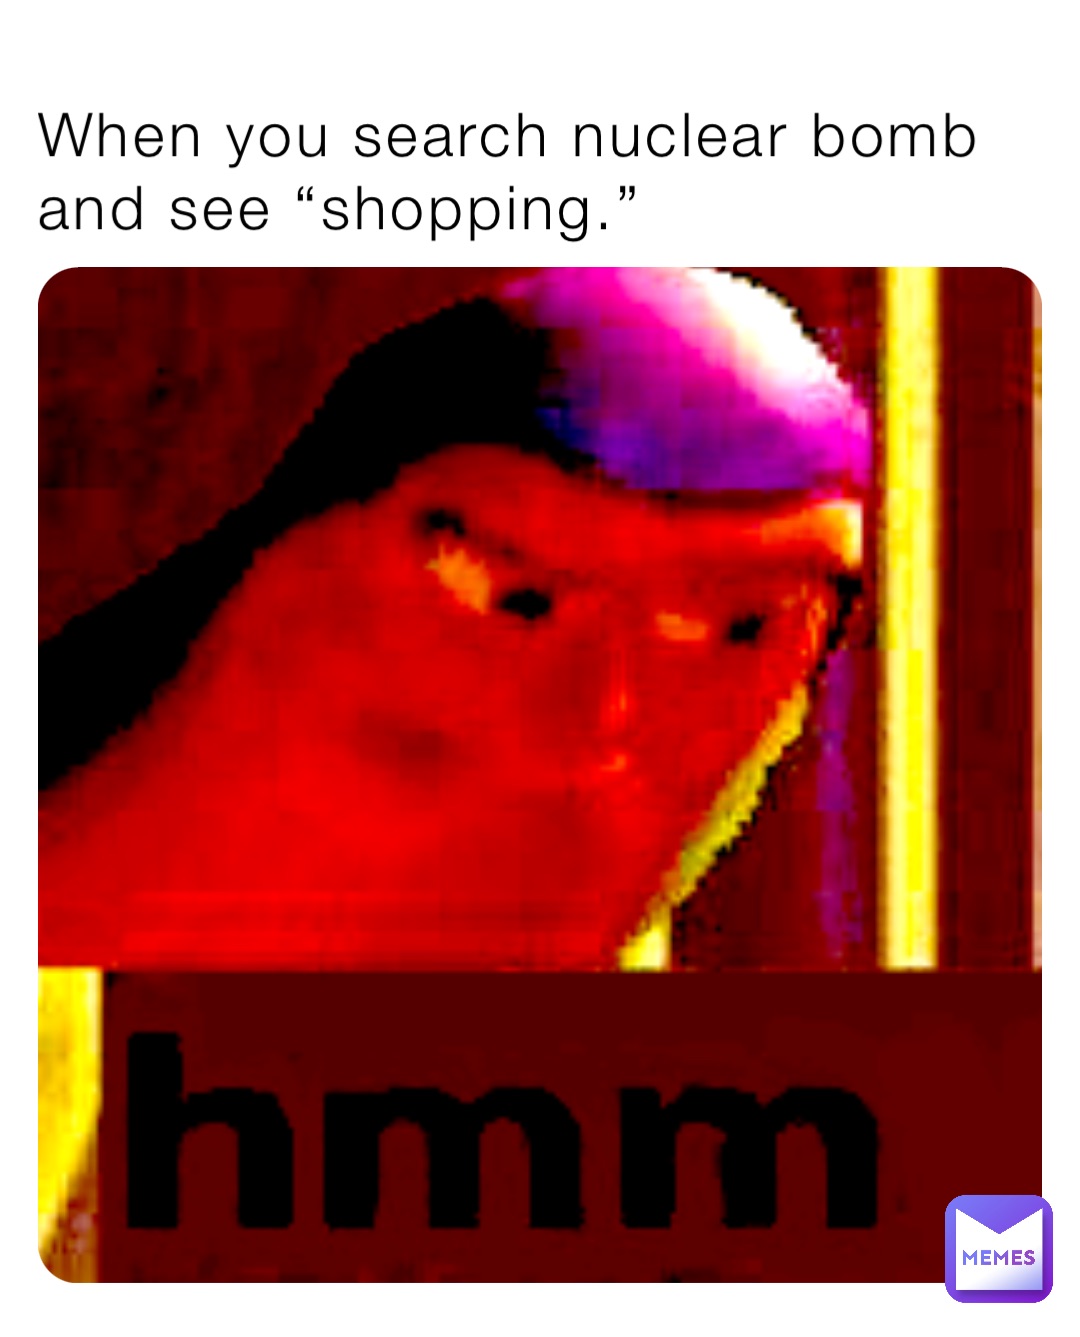 When you search nuclear bomb and see “shopping.”